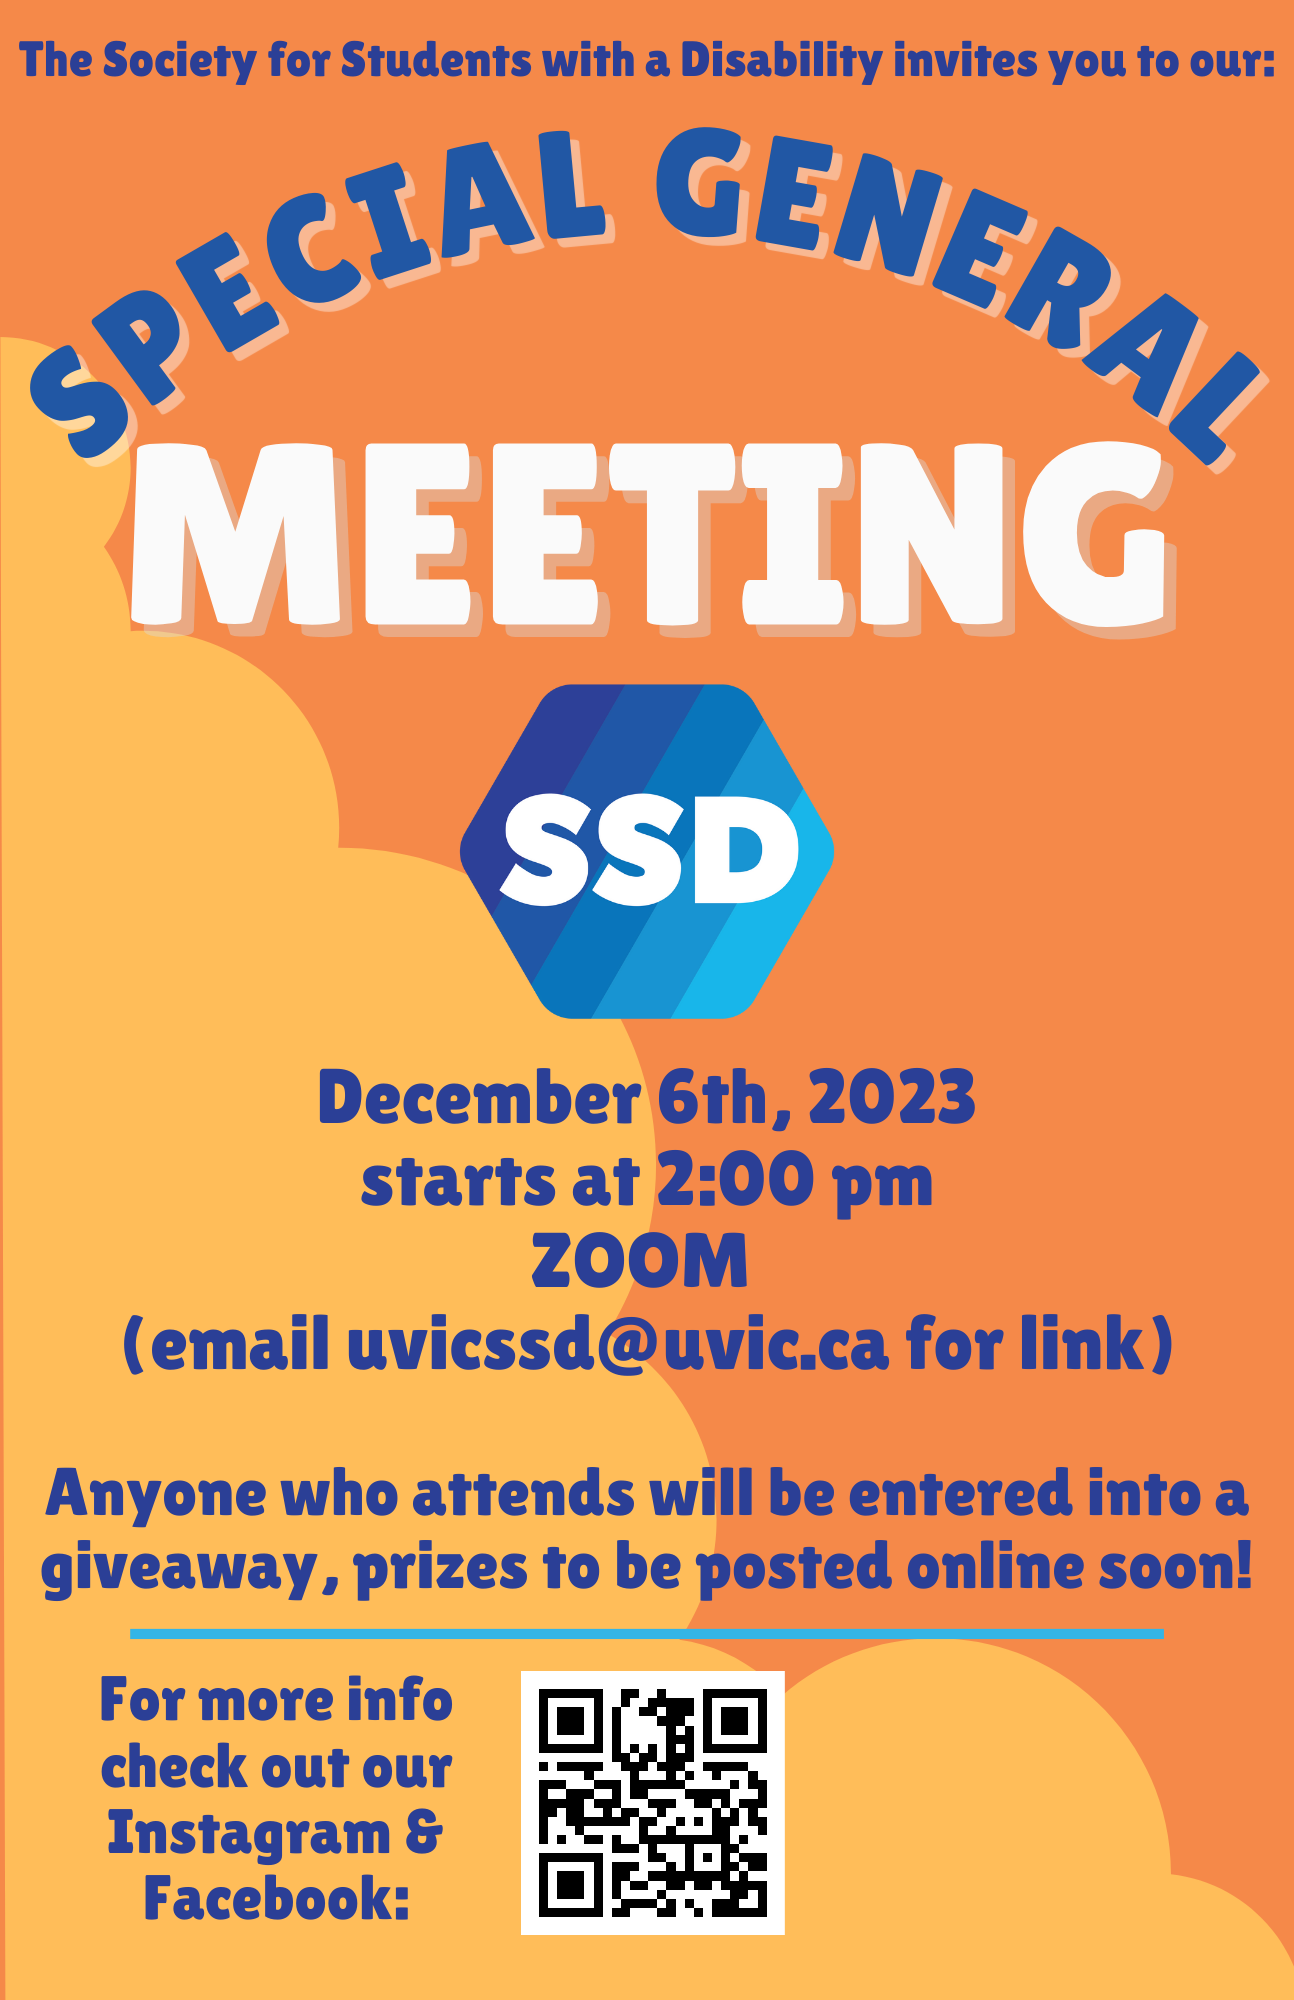 Poster on an orange background with the blue SSD logo in the centre of the image. The top of the image says "The Society for Students with a Disability invites you to our Special General Meeting". The lower half of the image contains the Special General Meeting details: "December 6th 2023. Starts at 2:00pm, ZOOM. Email uvicssd@uvic.ca for the link. Anyone who attends will be entered into a giveaway, prizes to be posted online soon! For more info, check out out Instagram and Facebook". There is a QR code linking to the SSD social media sites.